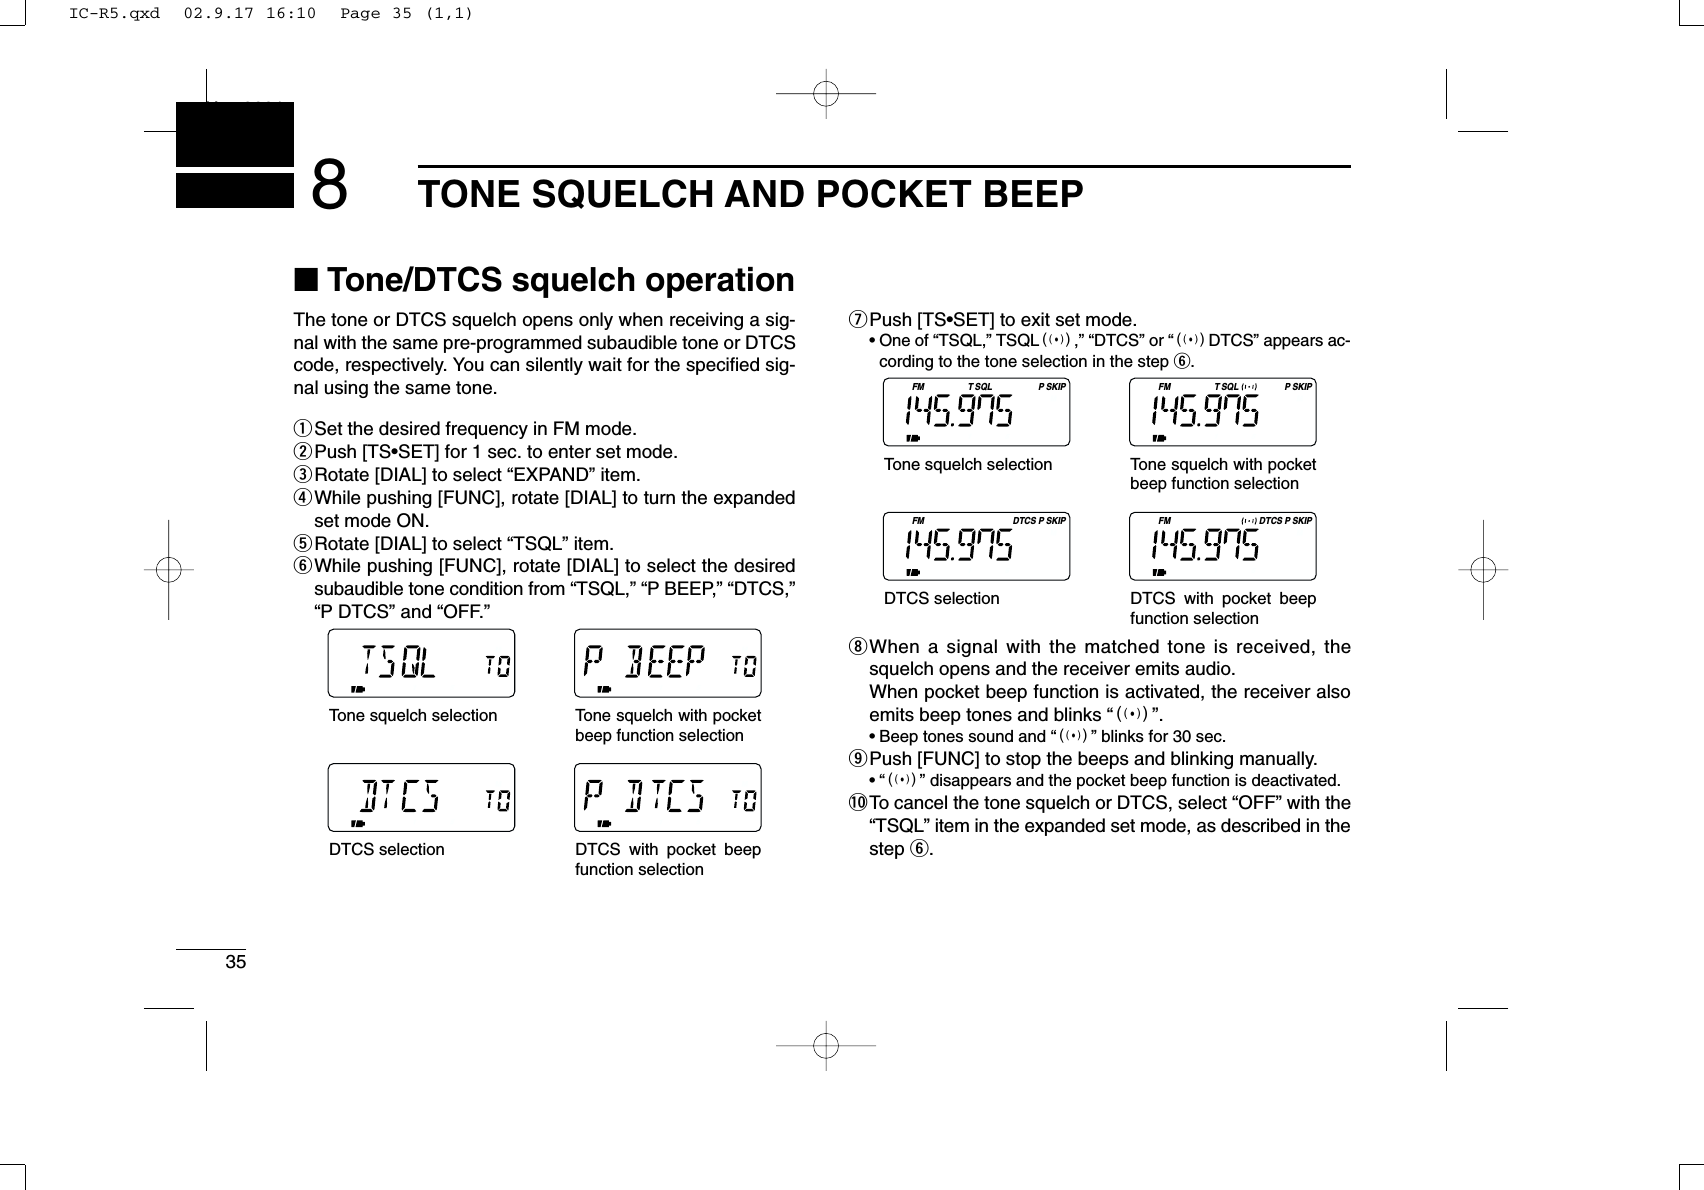 35TONE SQUELCH AND POCKET BEEPNew20018■Tone/DTCS squelch operationThe tone or DTCS squelch opens only when receiving a sig-nal with the same pre-programmed subaudible tone or DTCScode, respectively. You can silently wait for the speciﬁed sig-nal using the same tone.qSet the desired frequency in FM mode.wPush [TS•SET] for 1 sec. to enter set mode.eRotate [DIAL] to select “EXPAND” item.rWhile pushing [FUNC], rotate [DIAL] to turn the expandedset mode ON.tRotate [DIAL] to select “TSQL” item.yWhile pushing [FUNC], rotate [DIAL] to select the desiredsubaudible tone condition from “TSQL,” “P BEEP,” “DTCS,”“P DTCS” and “OFF.”uPush [TS•SET] to exit set mode.•One of “TSQL,” TSQLS,” “DTCS” or “SDTCS” appears ac-cording to the tone selection in the step y.iWhen a signal with the matched tone is received, thesquelch opens and the receiver emits audio. When pocket beep function is activated, the receiver alsoemits beep tones and blinks “S”.•Beep tones sound and “S” blinks for 30 sec.oPush [FUNC] to stop the beeps and blinking manually.•“S” disappears and the pocket beep function is deactivated.!0To cancel the tone squelch or DTCS, select “OFF” with the“TSQL” item in the expanded set mode, as described in thestep y.FM SQL SKIPTP FM SQL SKIPTPFM DTCS SKIPPFM DTCS SKIPPTone squelch selectionTone squelch with pocket beep function selectionDTCS selection DTCS with pocket beep function selectionTone squelch selectionTone squelch with pocket beep function selectionDTCS selection DTCS with pocket beep function selectionIC-R5.qxd  02.9.17 16:10  Page 35 (1,1)